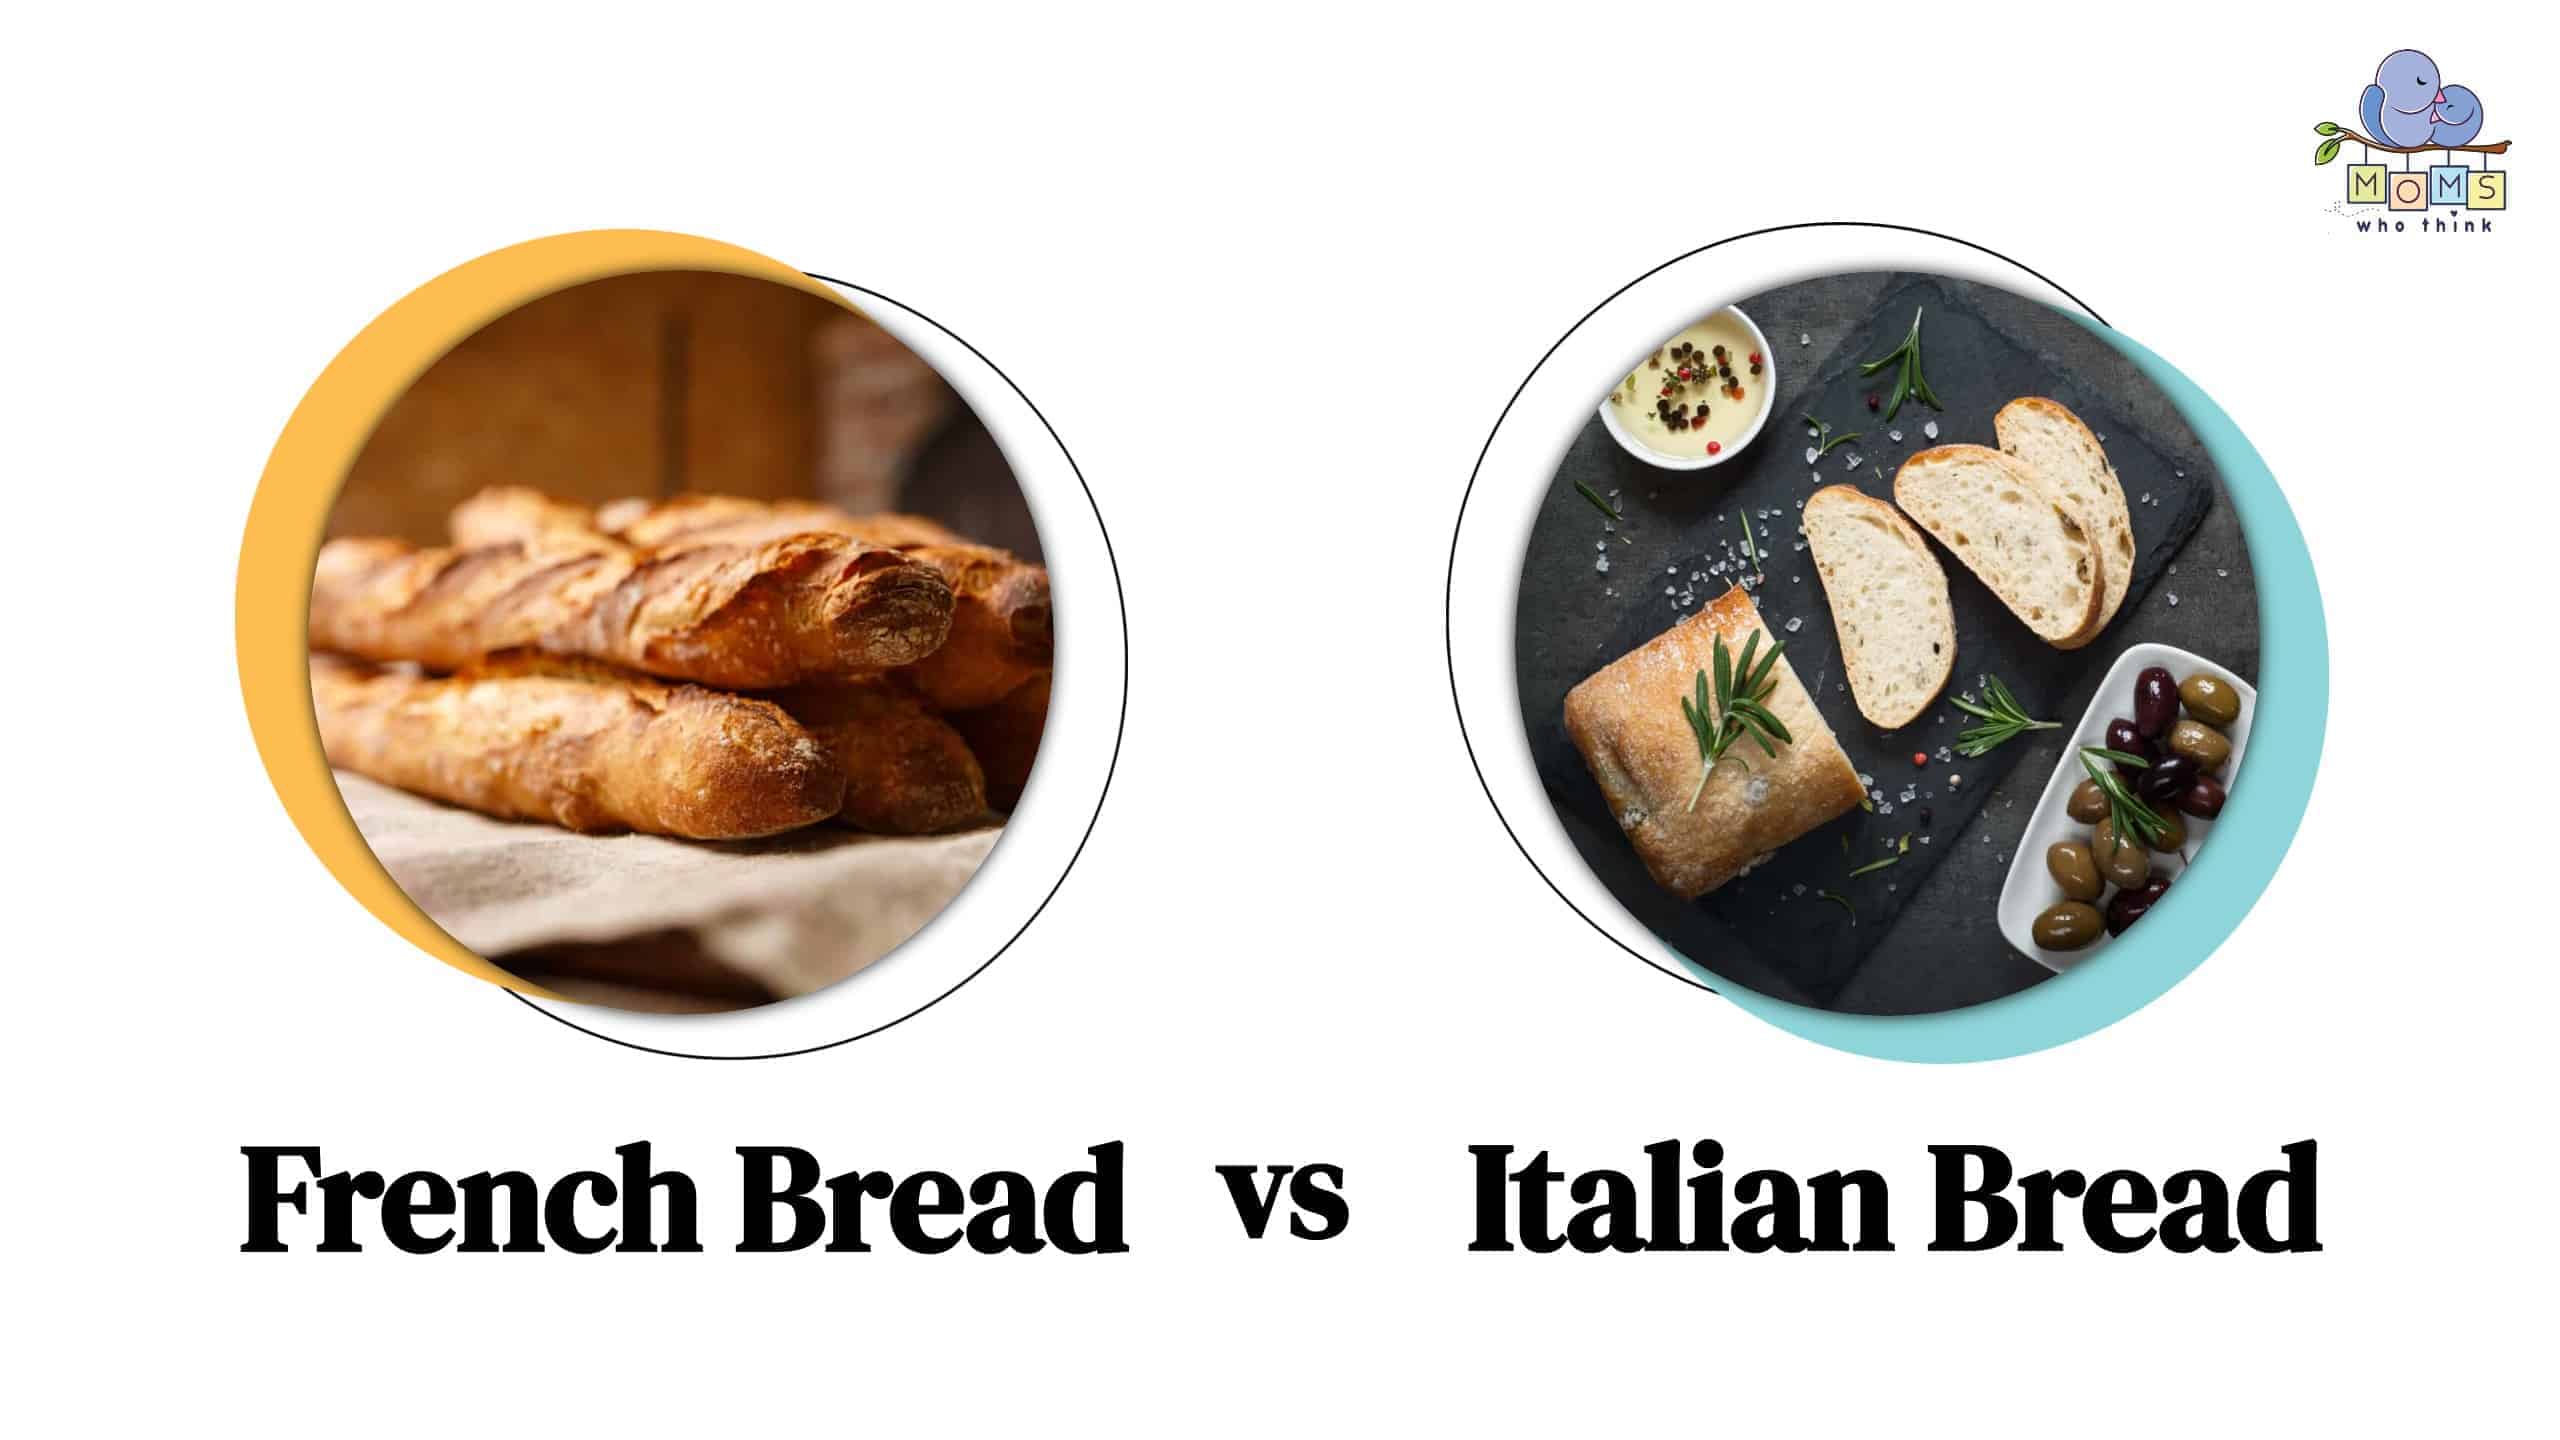 French Bread vs. Italian Bread: What are the differences?